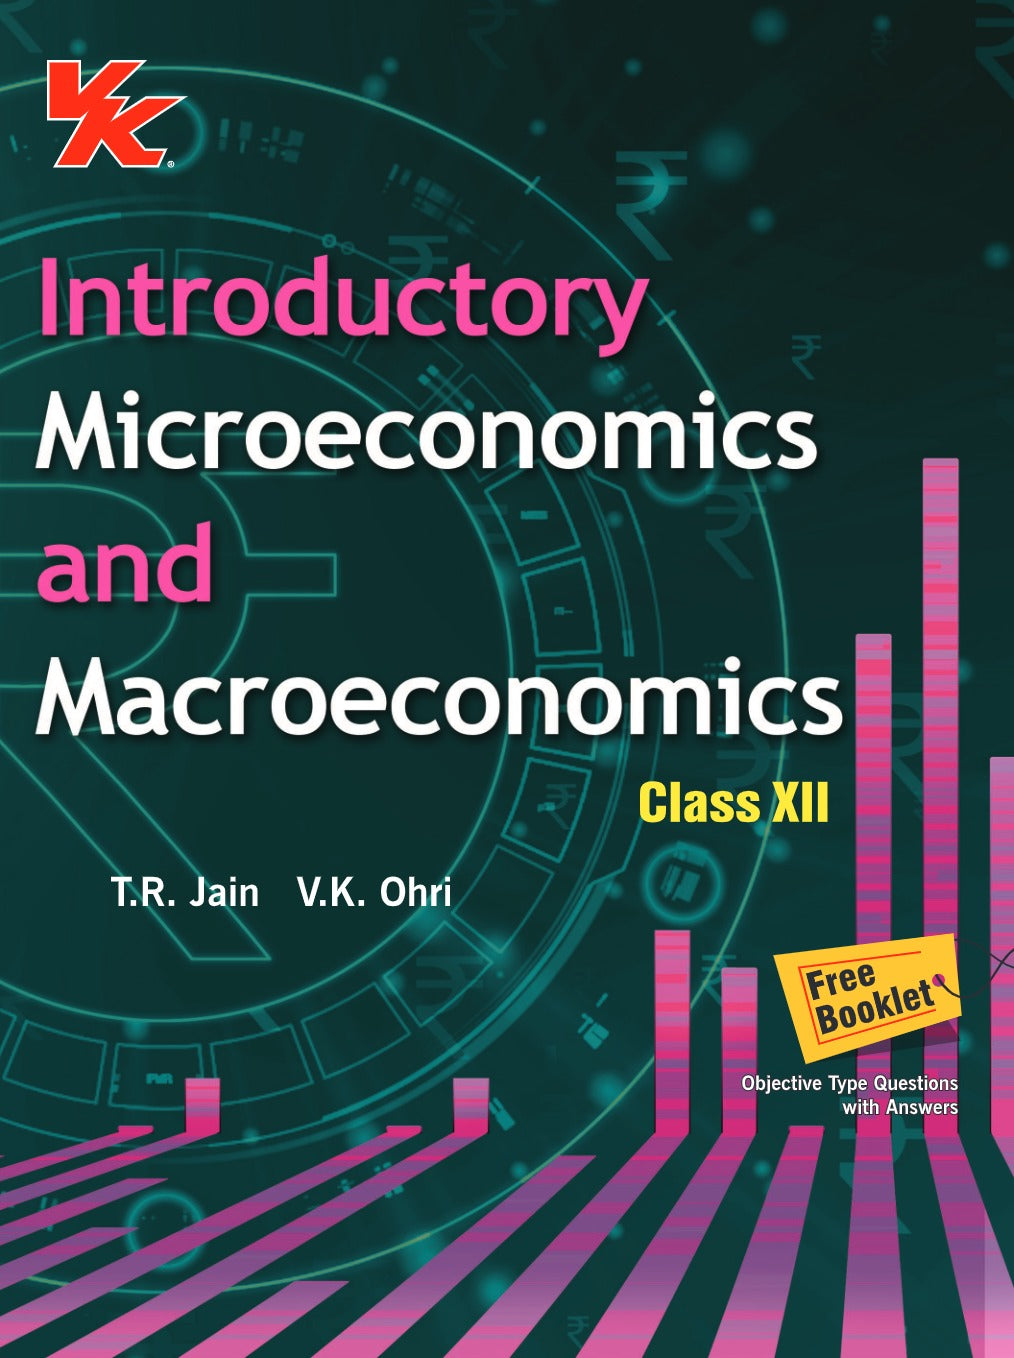 Introductory Microeconomics and Macroeconomics for Class 12 BSEB Board by T.R Jain & V.K Ohri 2024-25 Examination